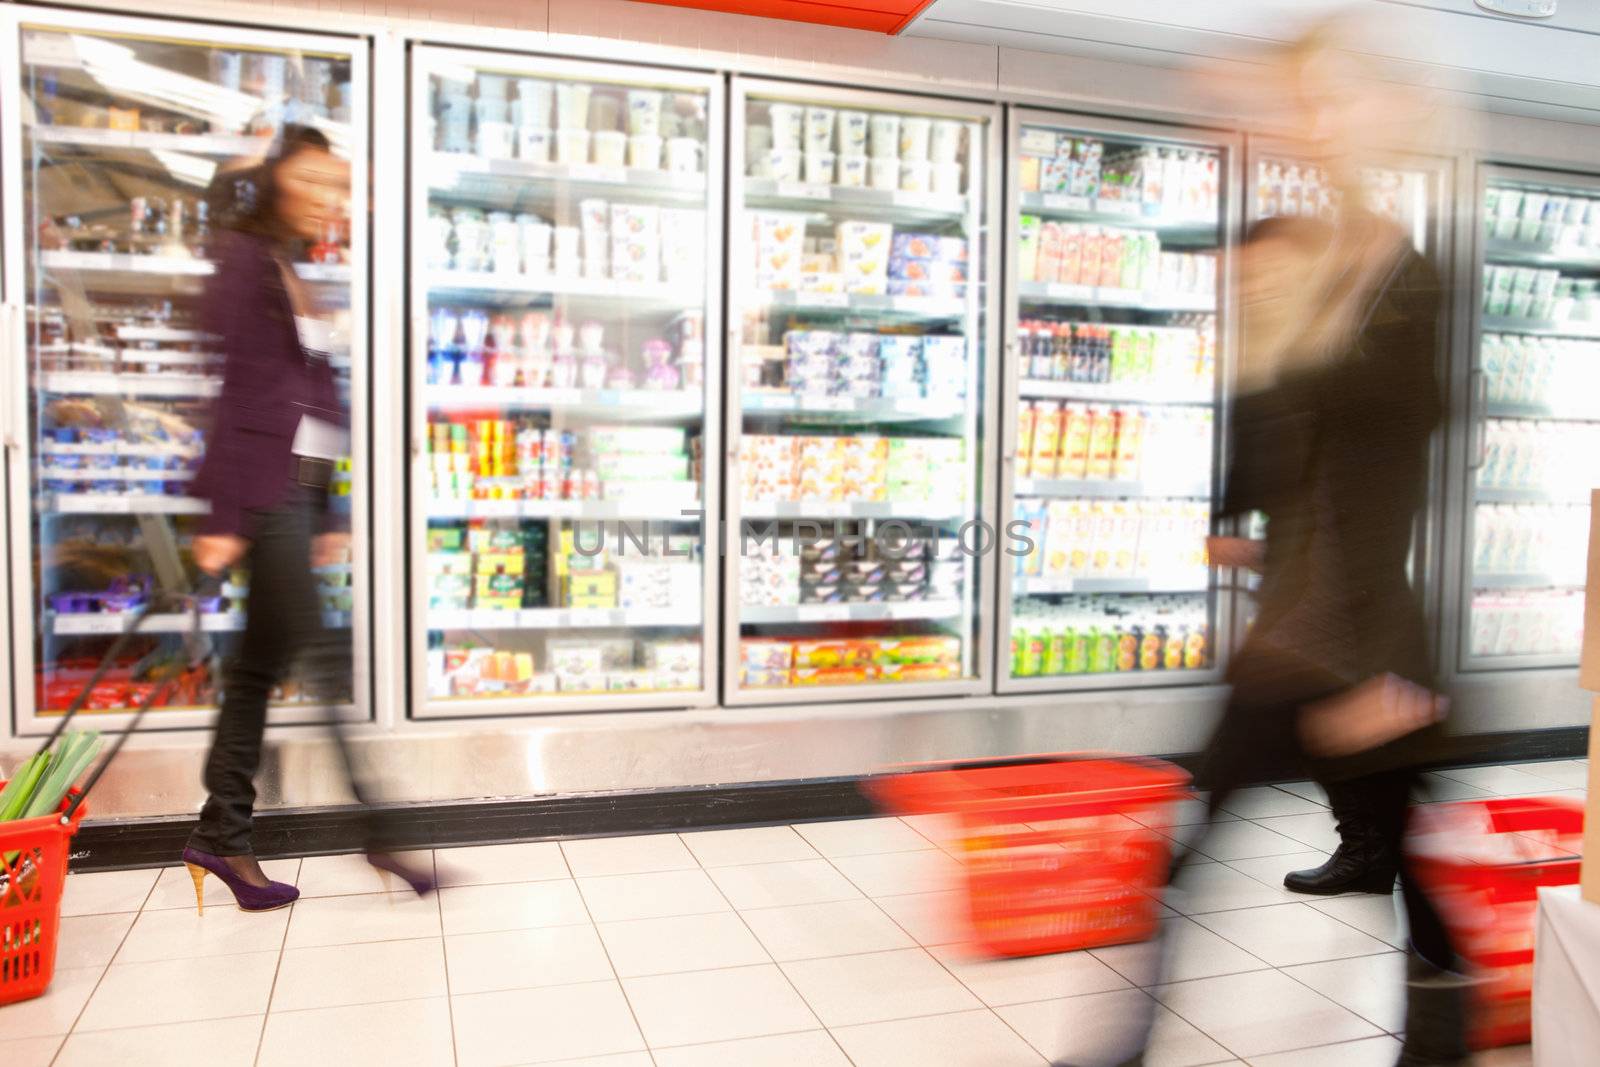 Blurred motion of people walking near refrigerator in shopping centre with baskets